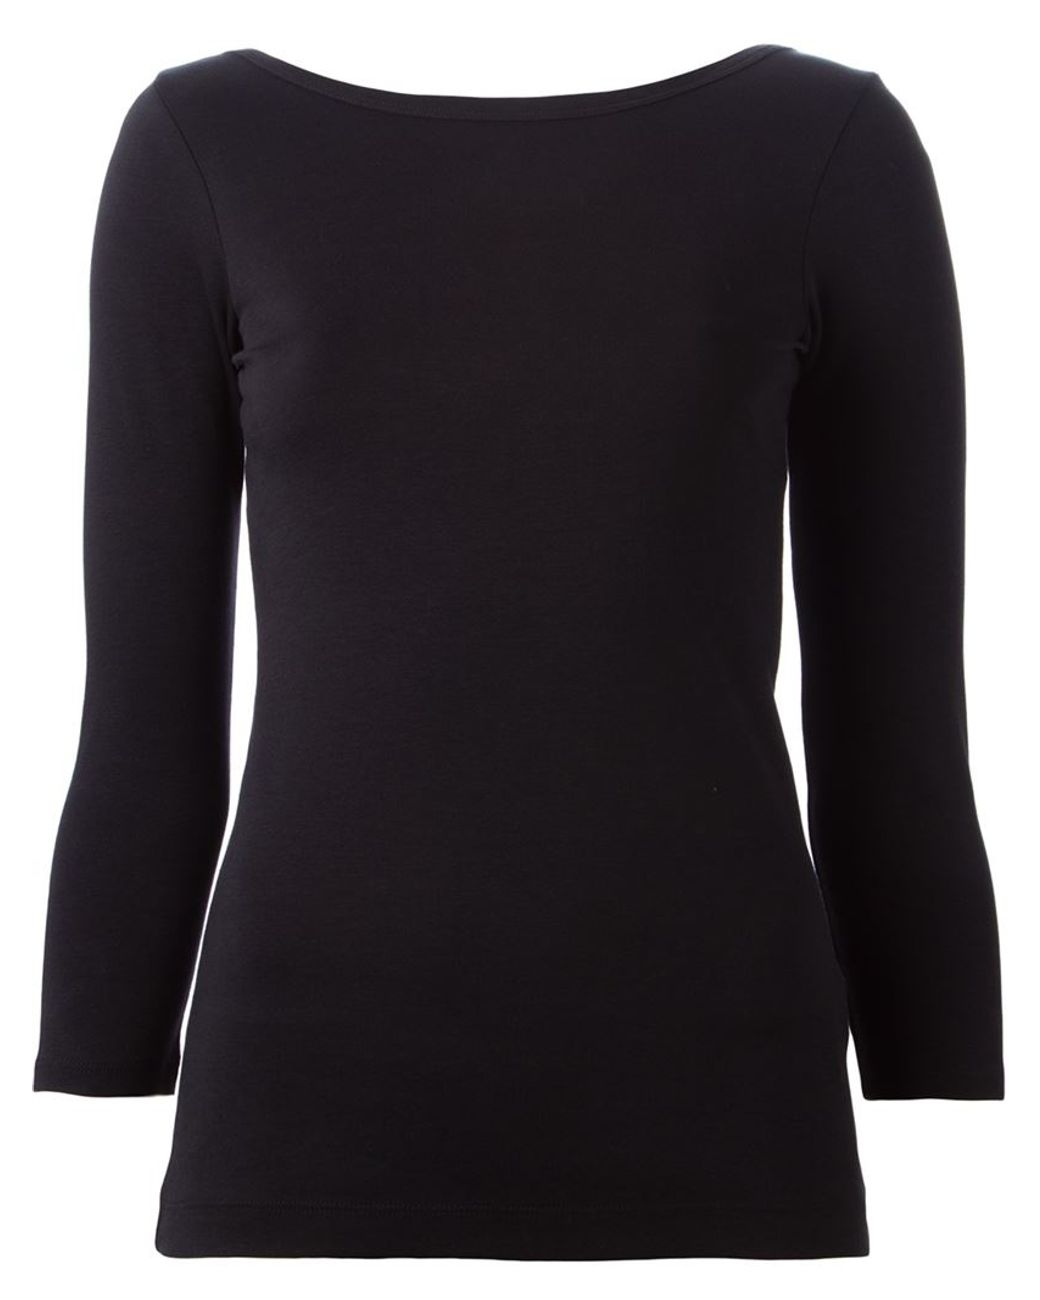 Theory Boat Neck Top in Black | Lyst